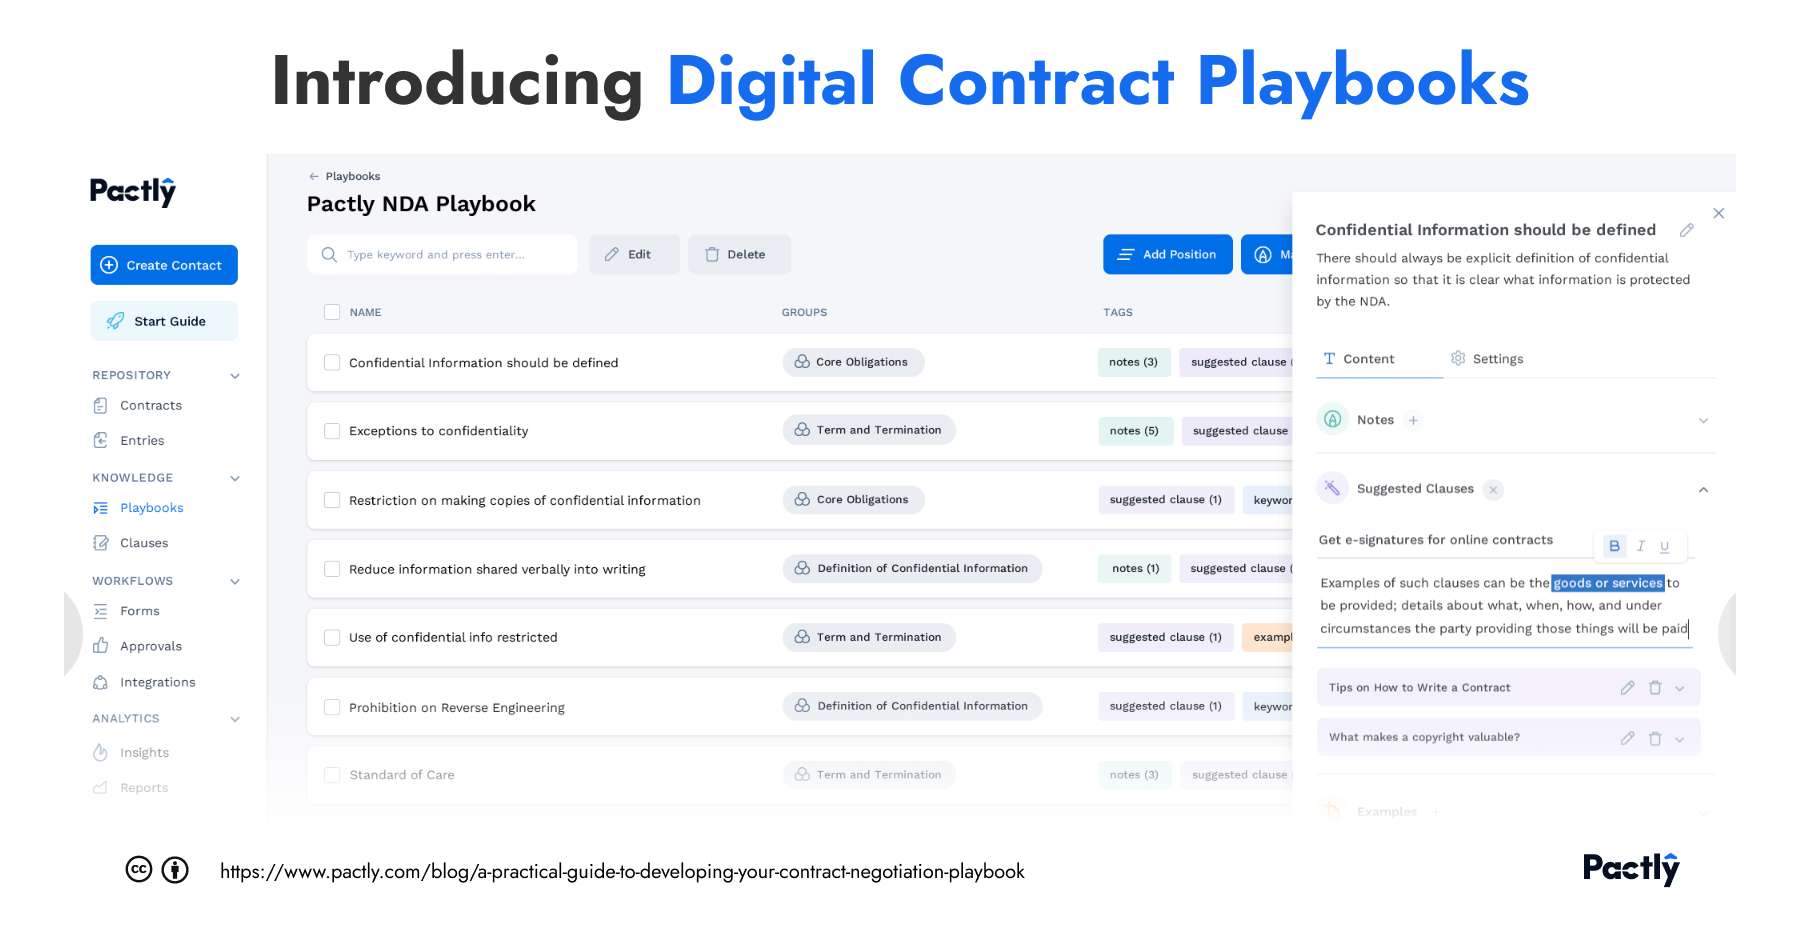 Screenshot of the Pactly playbook configuration page allowing our users to build digital contract playbooks